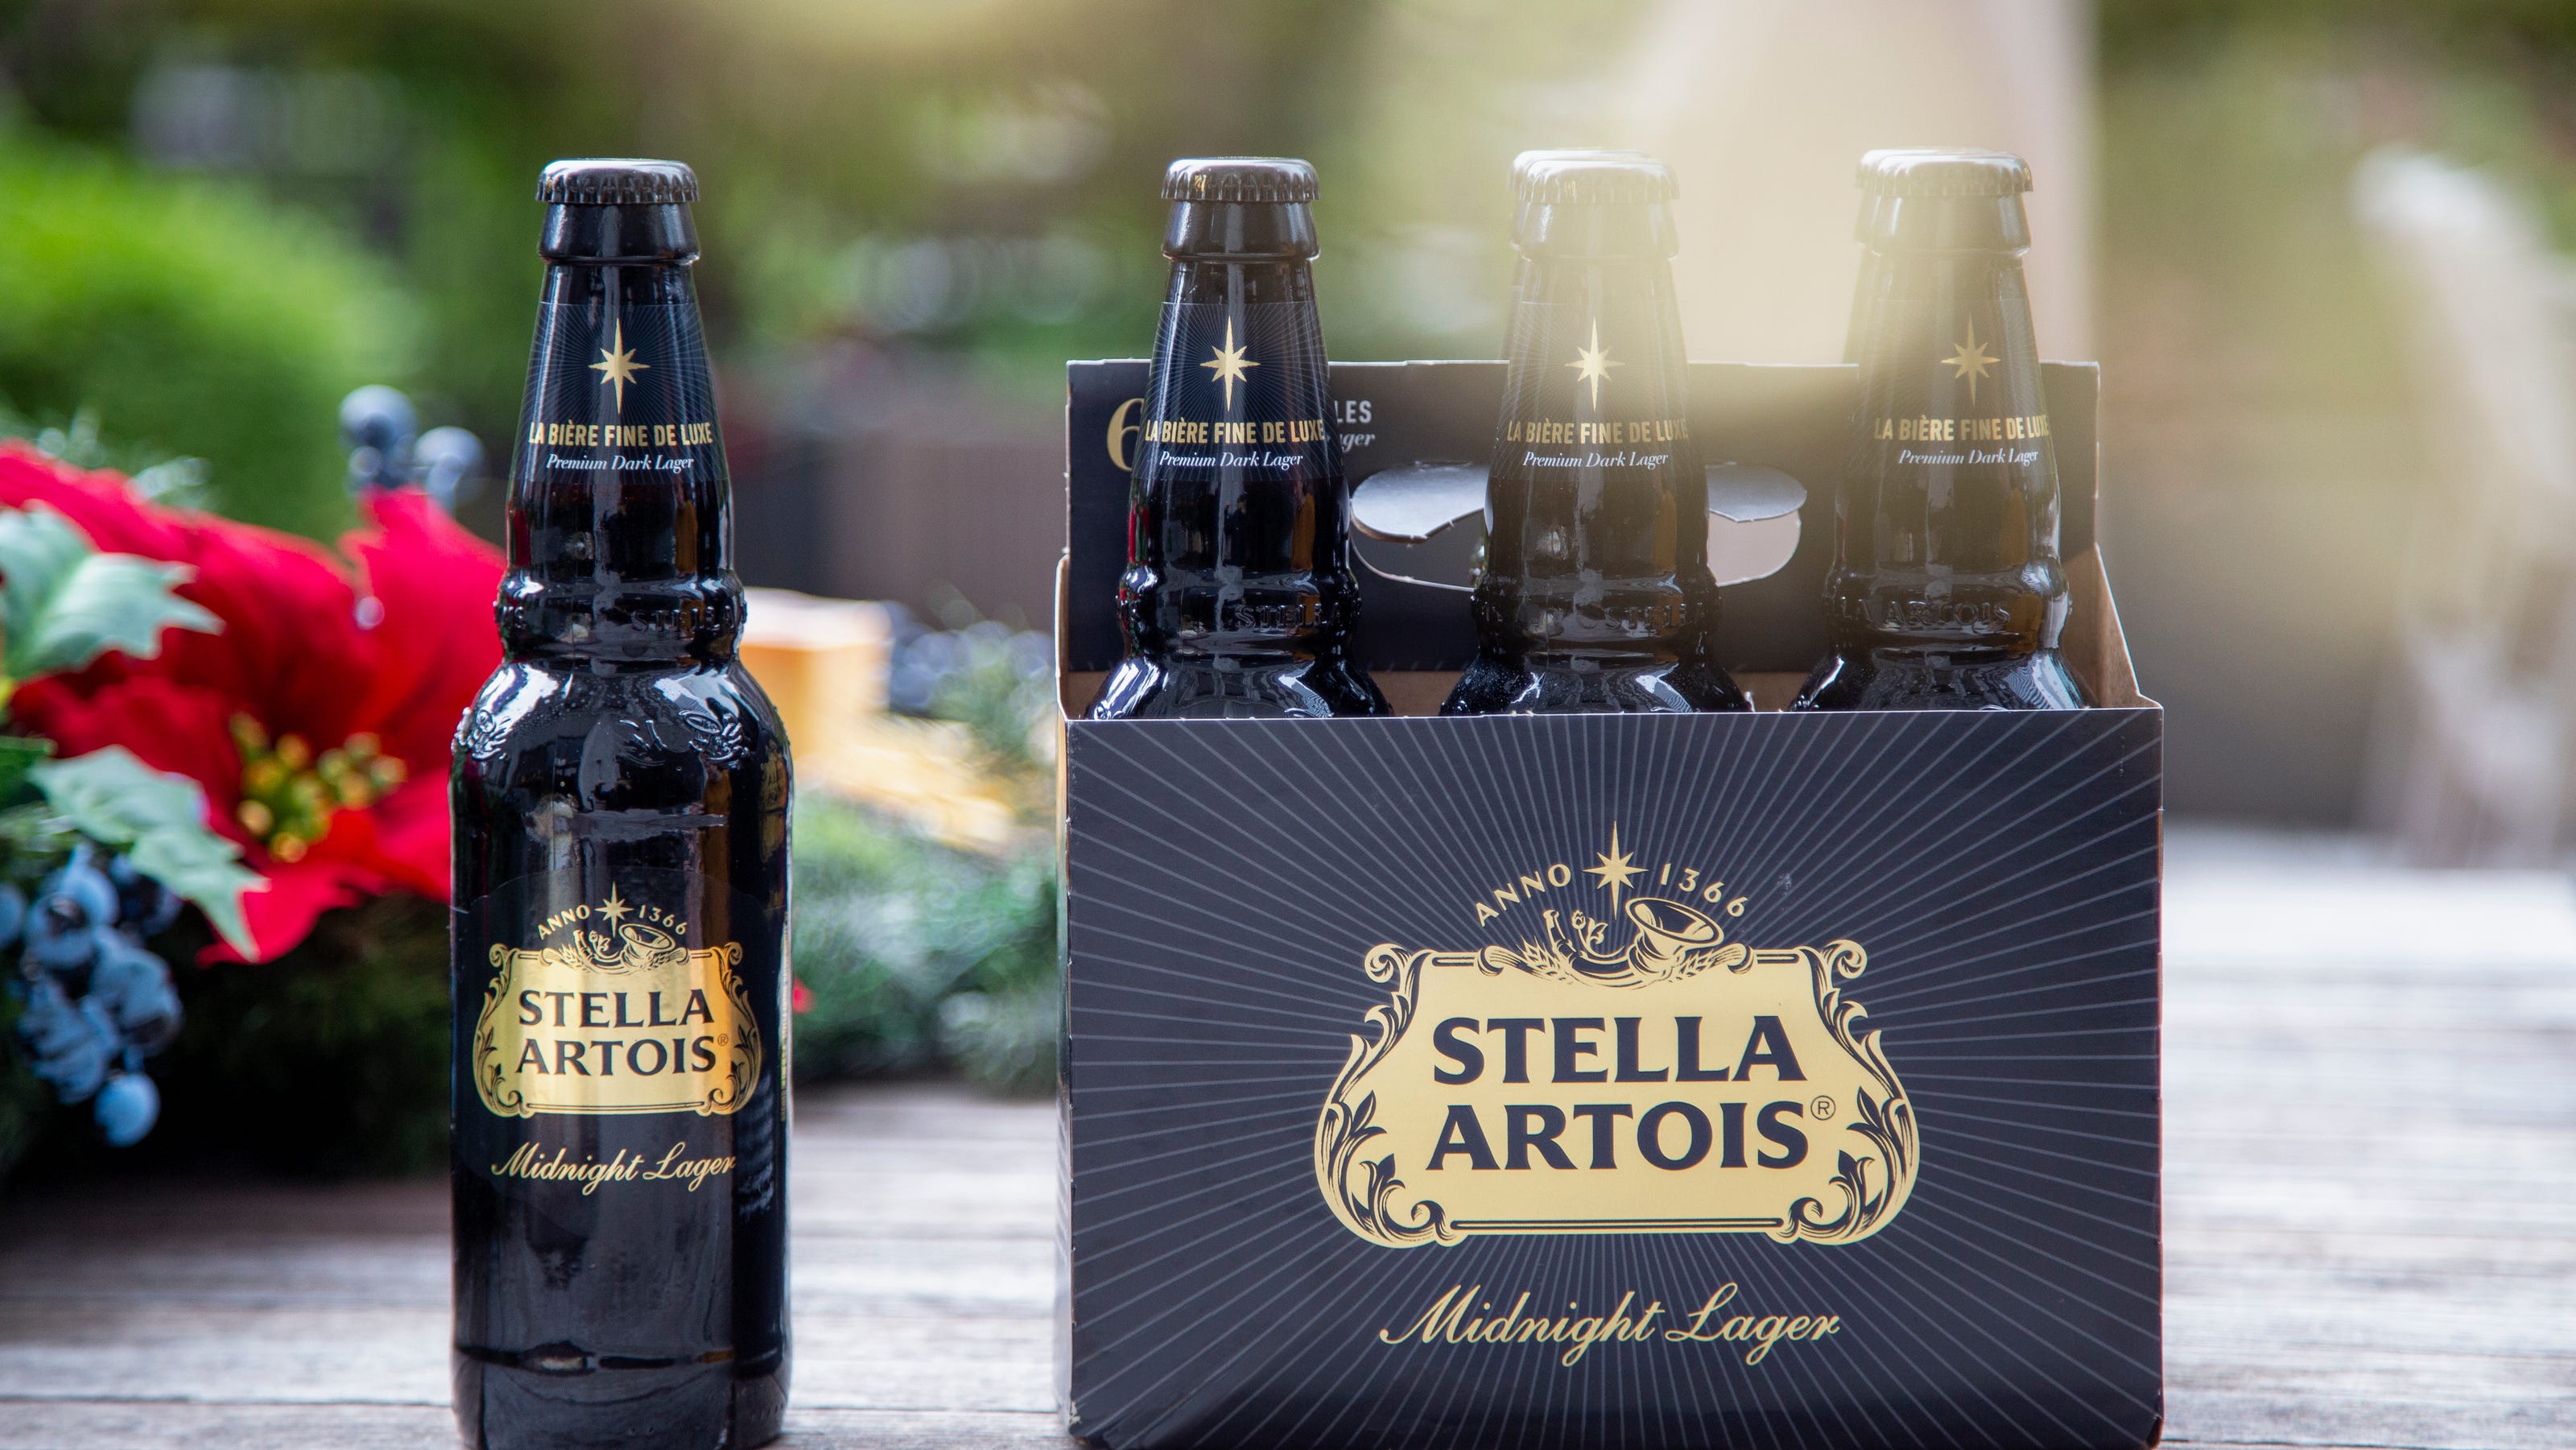 Stella Artois to release first limited edition US holiday beer Nov. 4